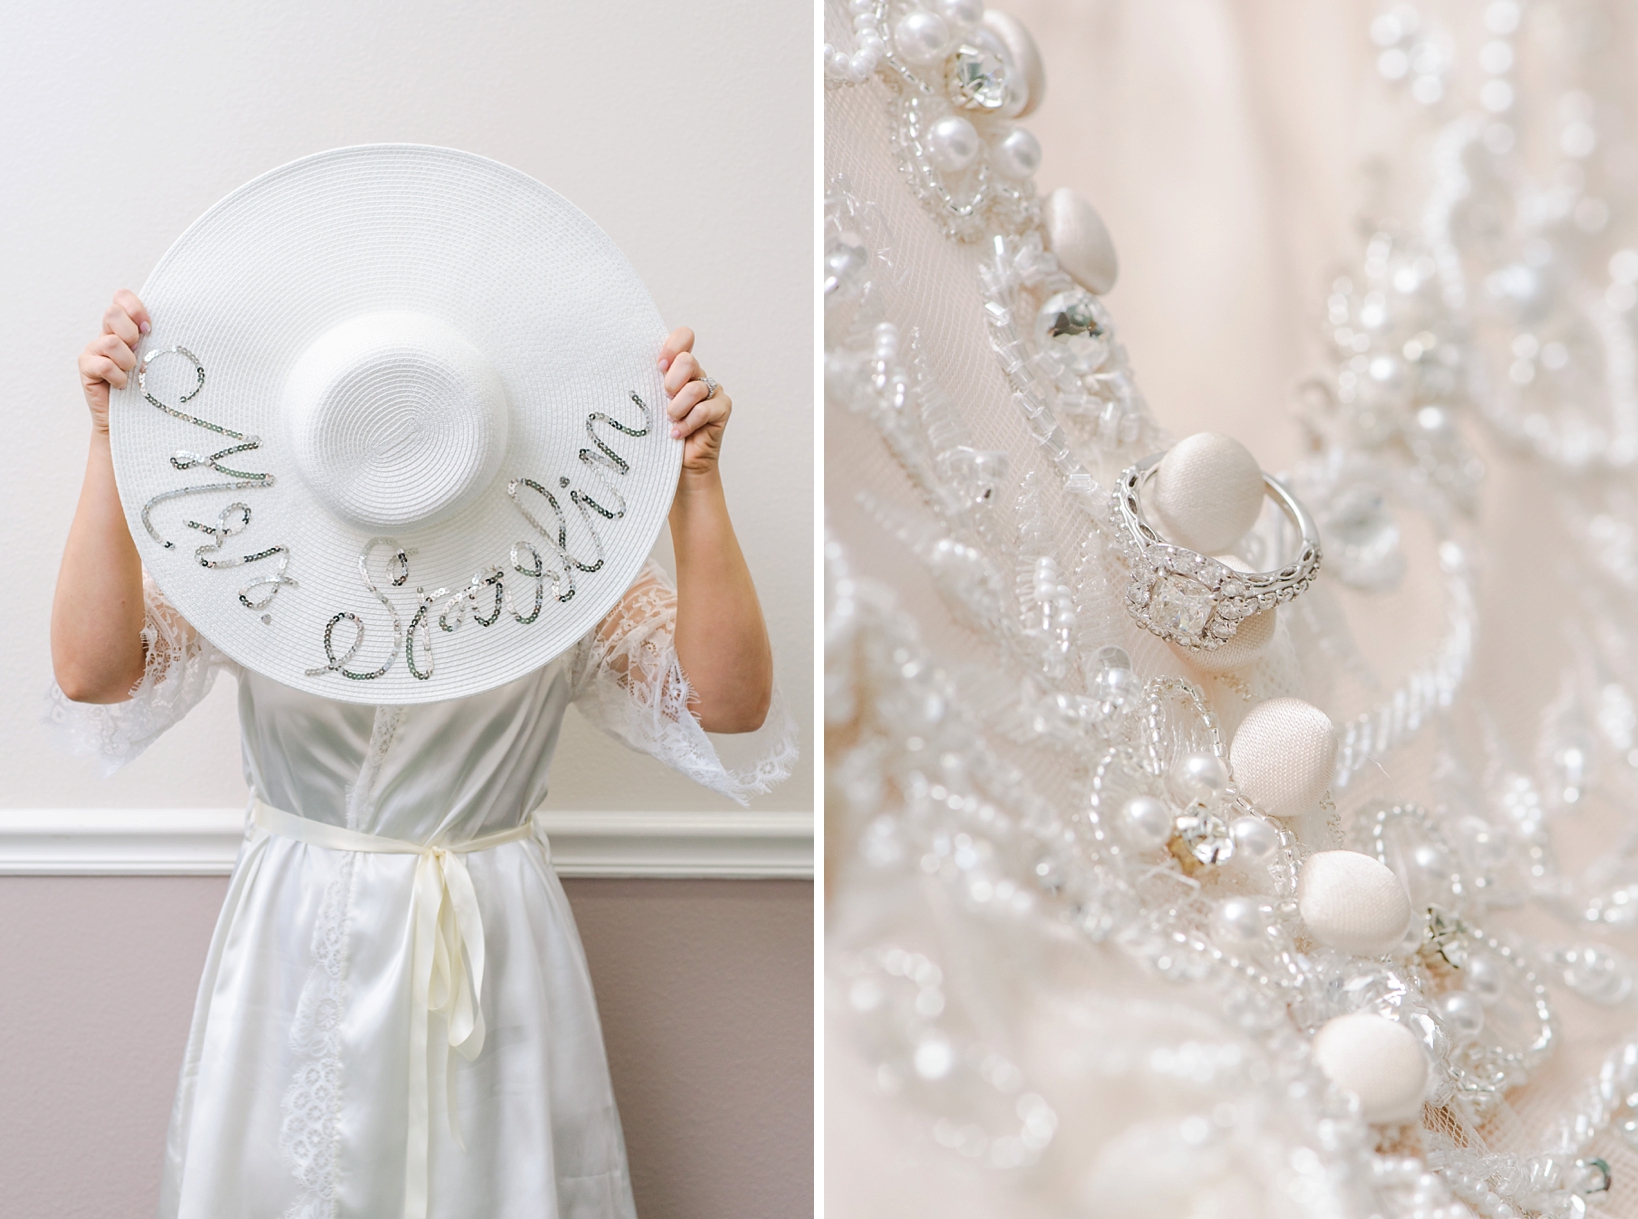 Bride holding a customized hat with her new last name on it and a macro detail of the ring on the wedding dress by Sarah & Ben Photography